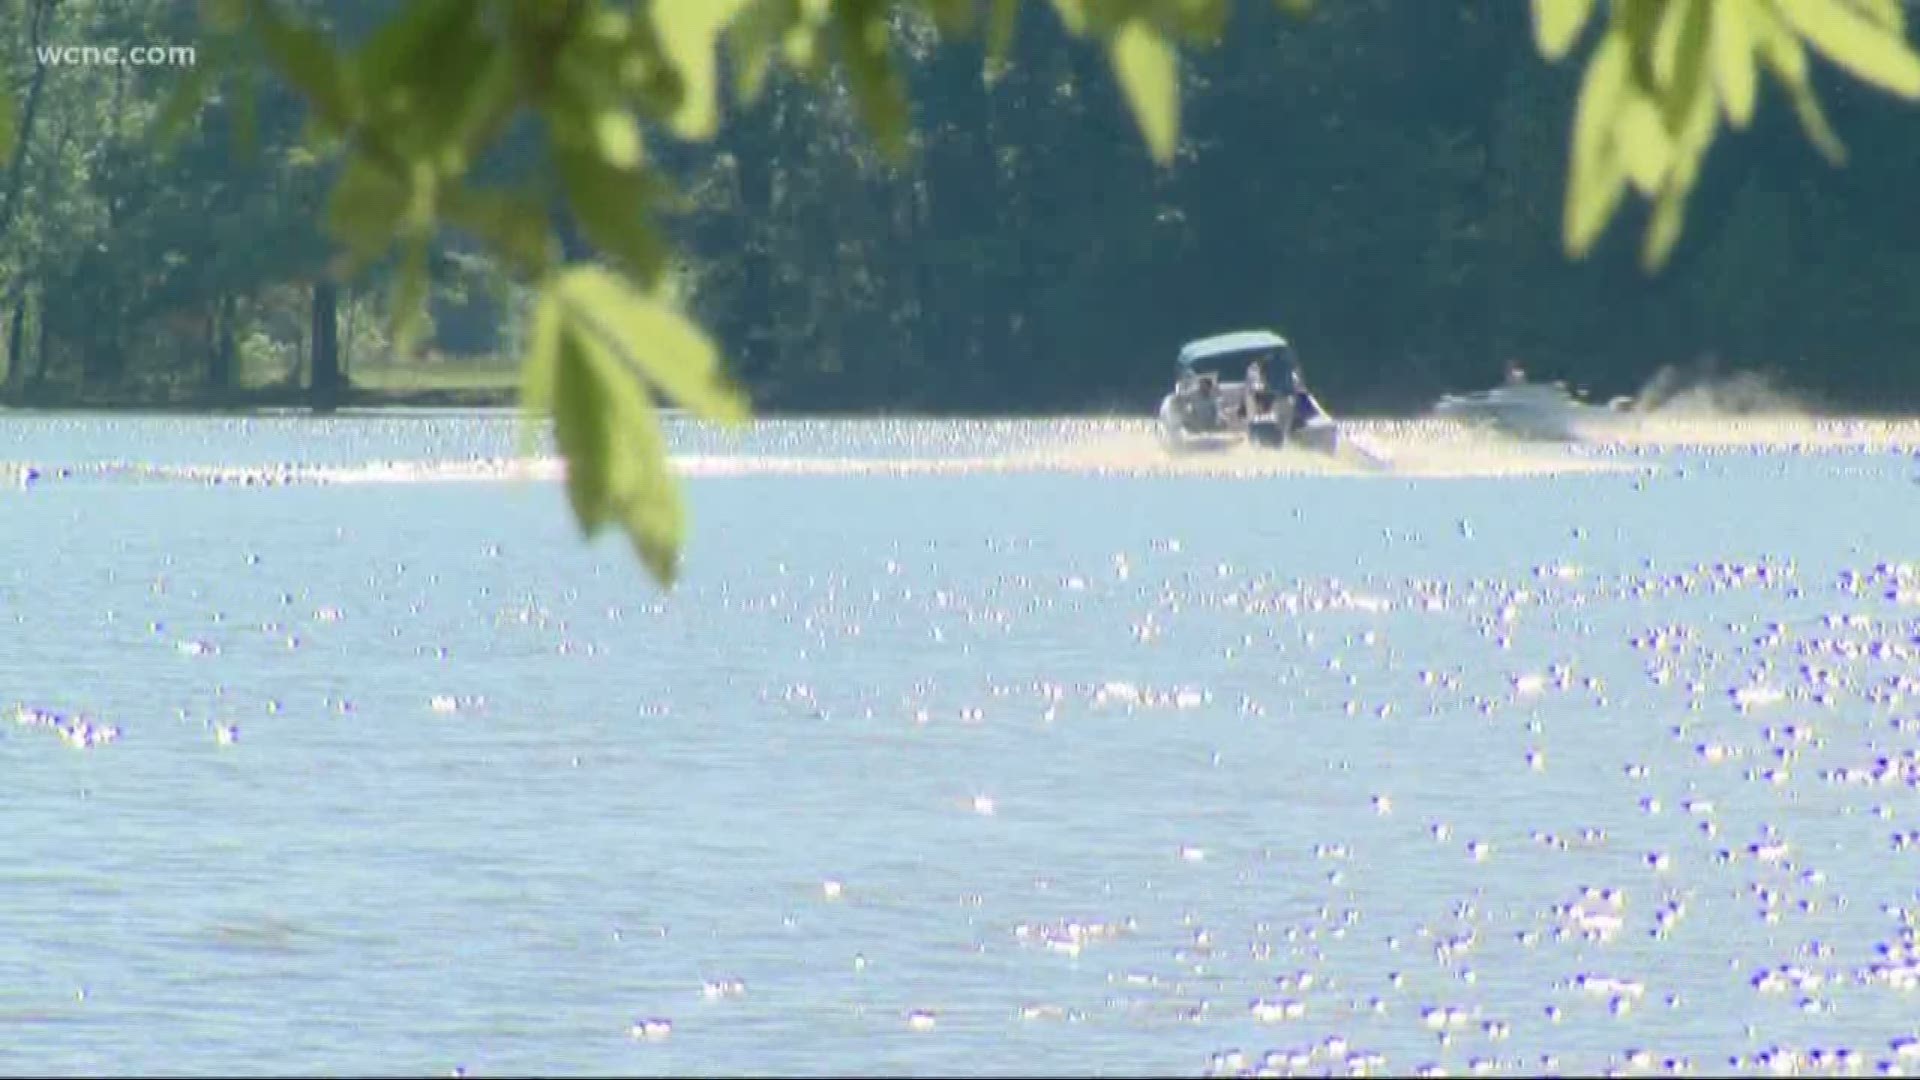 With the temperature soaring into the 90s over the weekend in the Carolinas, it means people are getting out on the water to cool off. But it also means proper precautions need to be taken to stay safe.